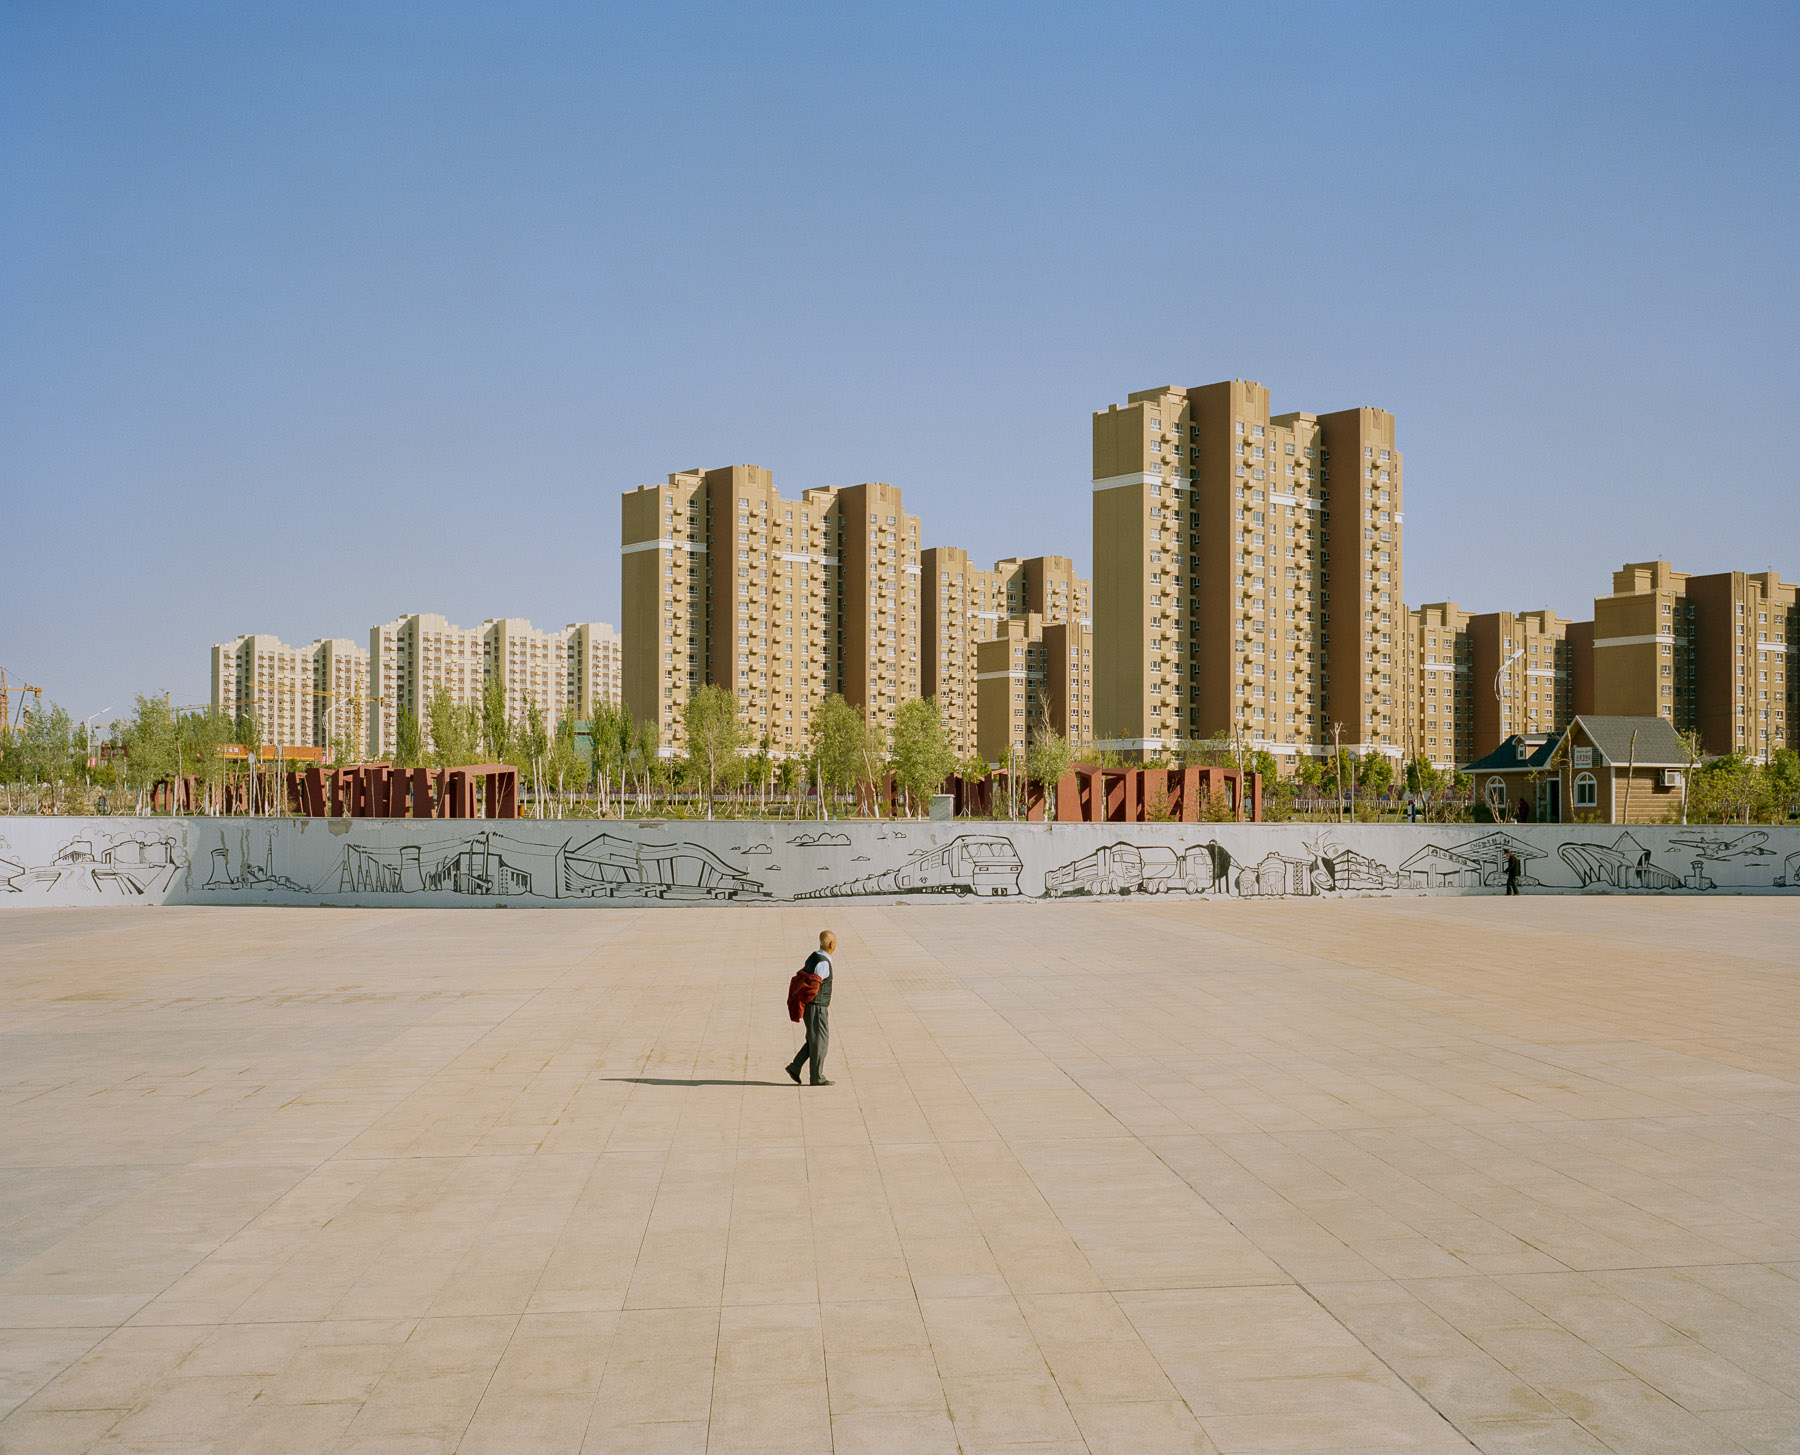  May 2017. Xinjiang province, China. Downtown area in the city of Karamai in northern Xinjiang province. This modern city has developped over the last three decades thanks to oil fields but has very low density of inhabitants.  